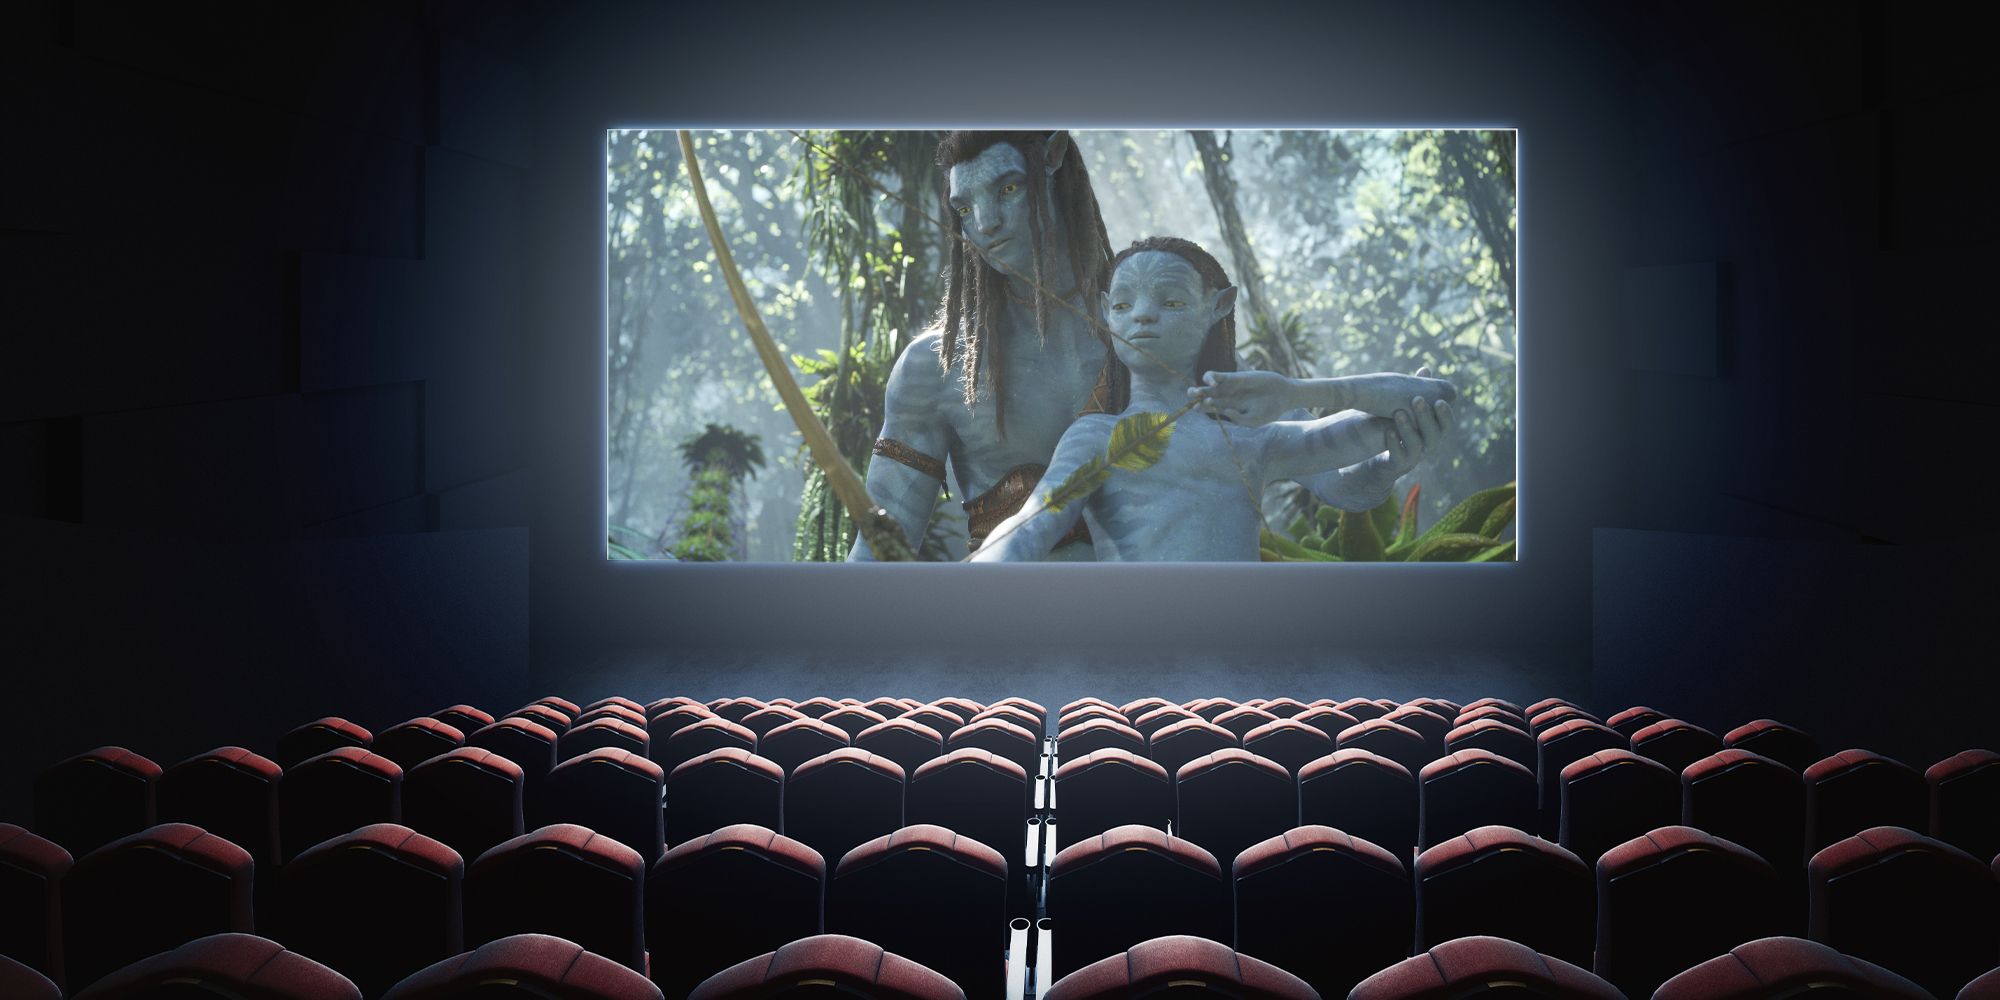 Avatar 2 Cinema Formats: IMAX, 3D, Dolby & more